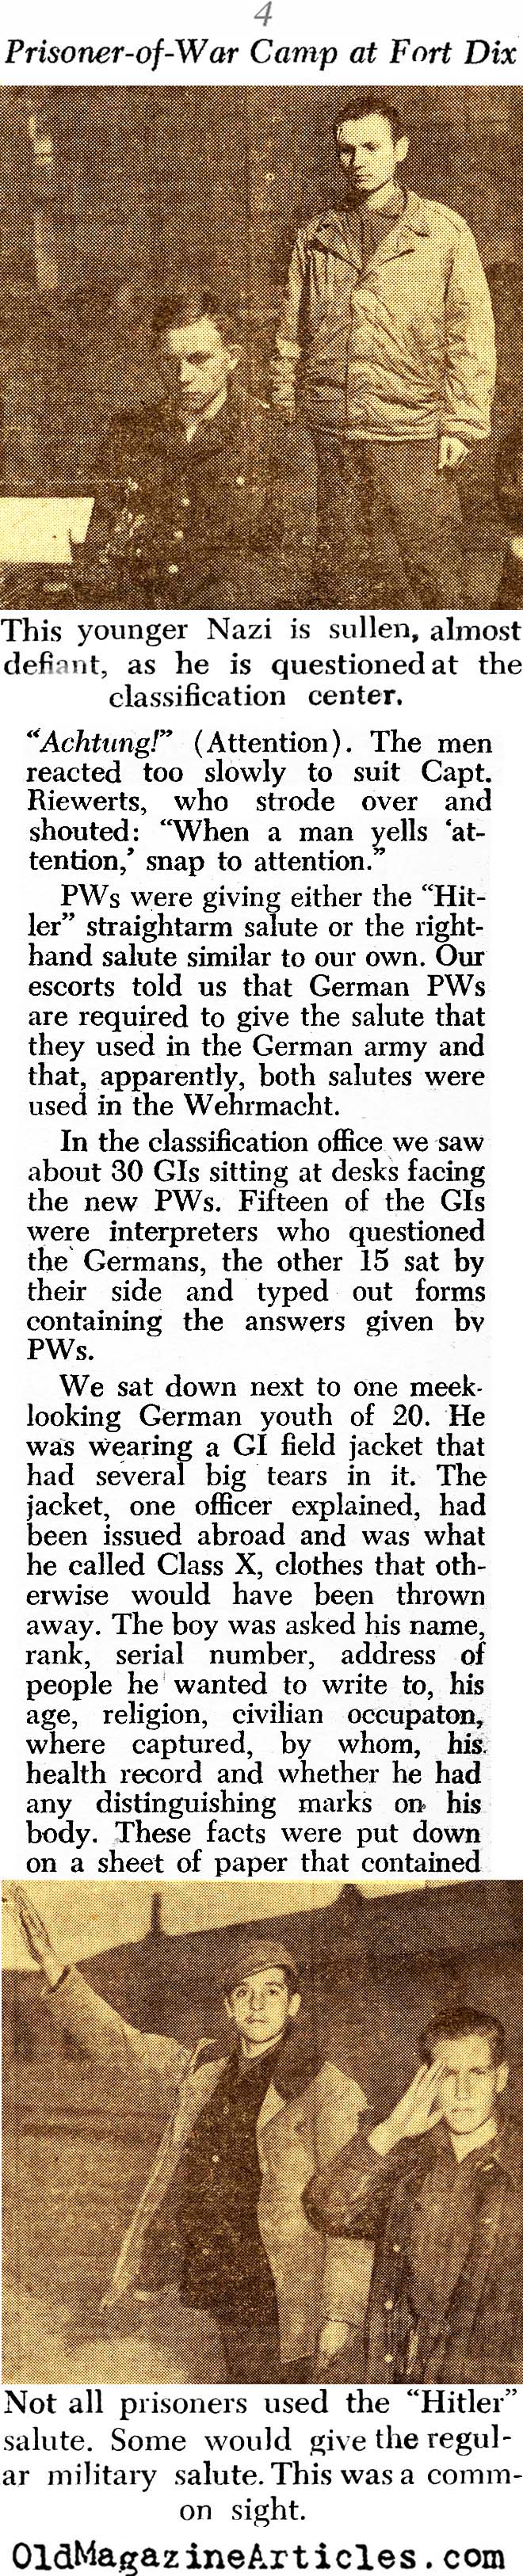 POWs at Fort Dix (PM Tabloid, 1945)